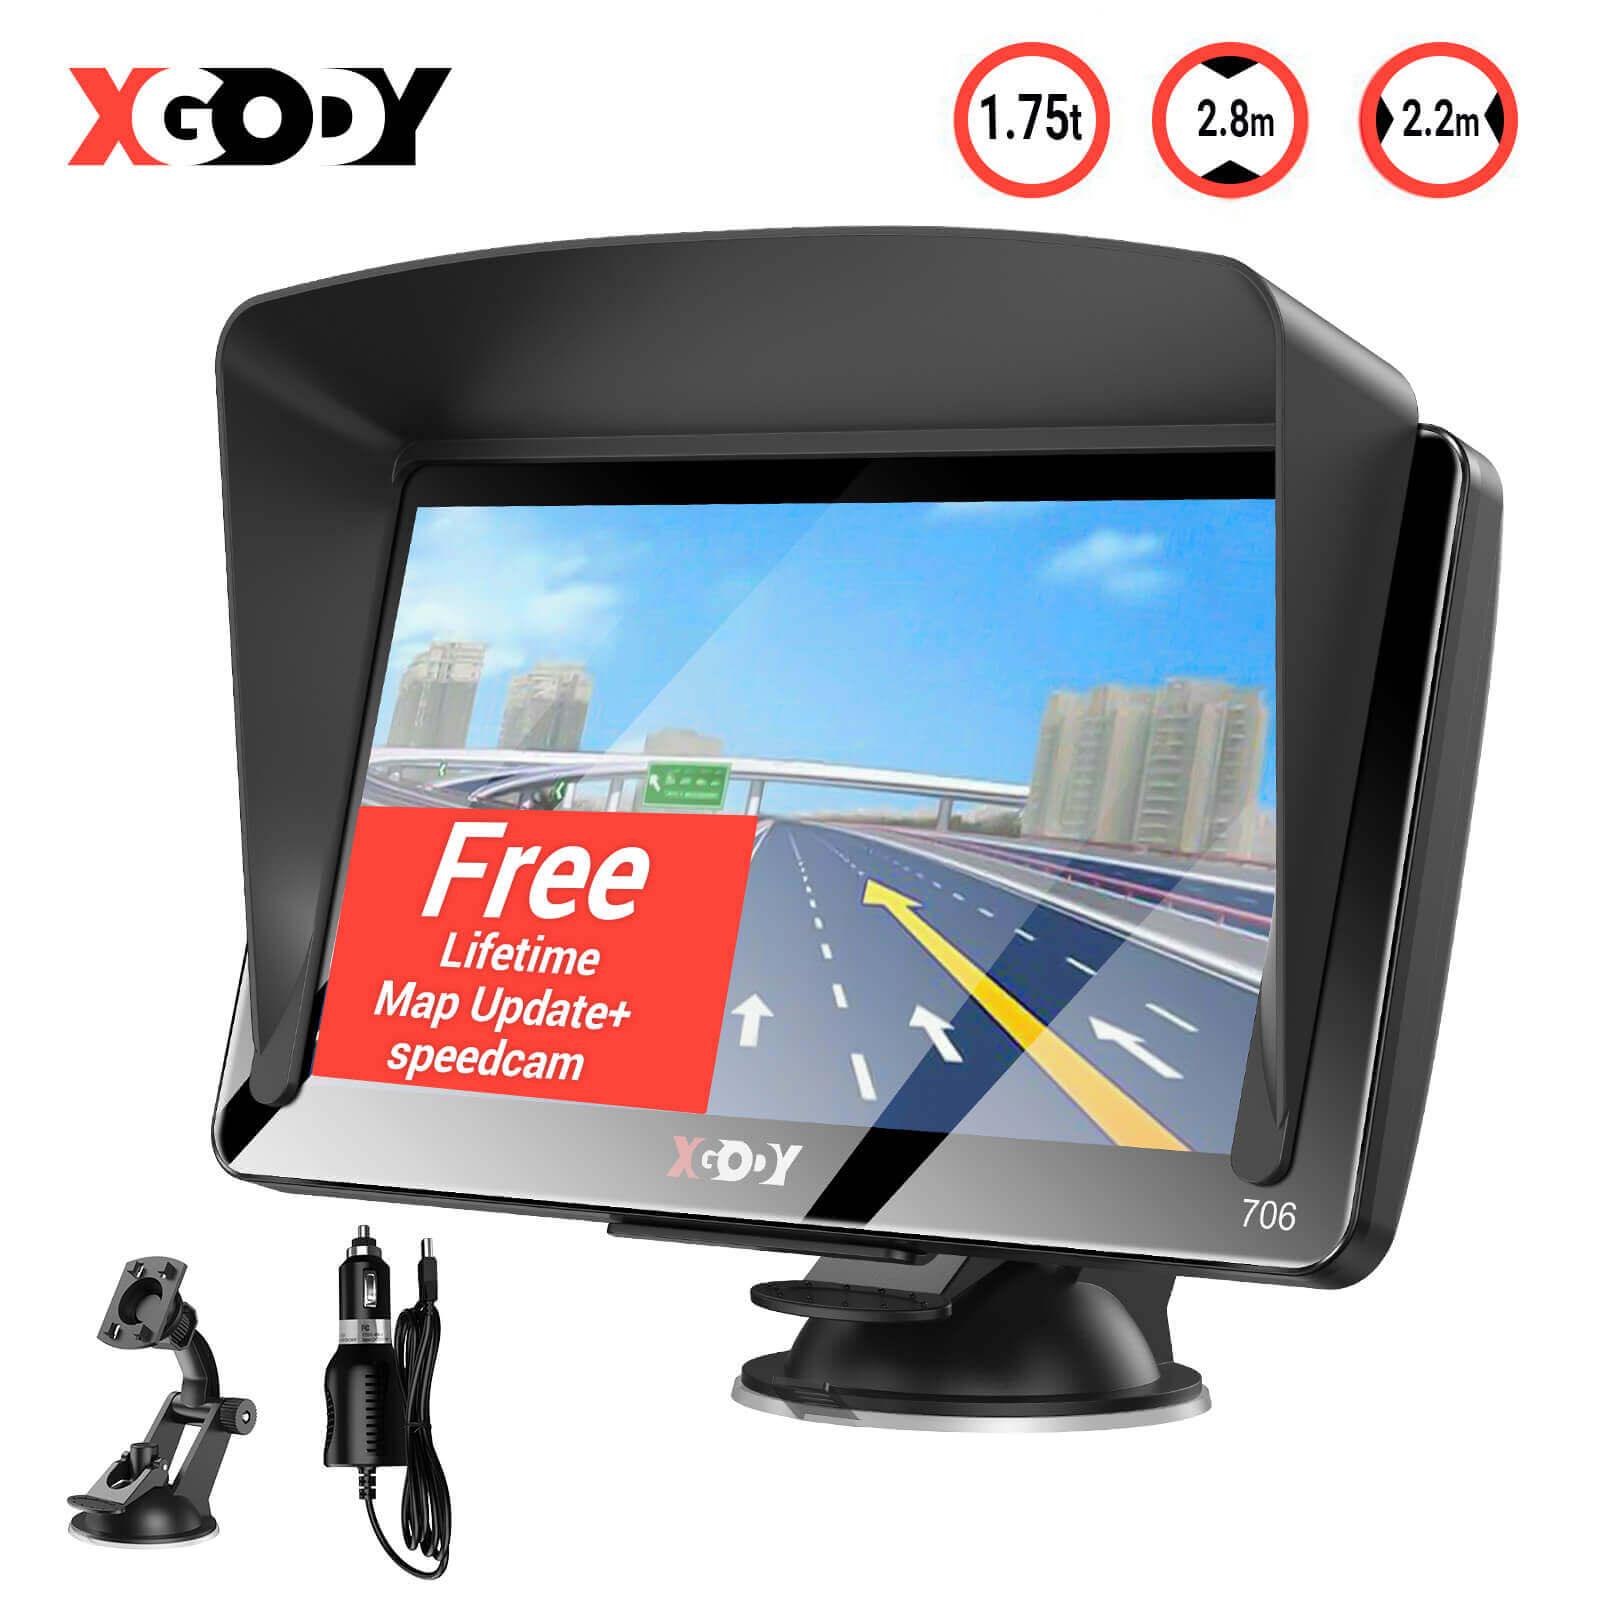 Cost-effective and Most worthwhile XGODY 706F/706BT 2.5D GPS Navigation For Car, With Latest Global Maps, Intelligent Voice Guidance - XGODY 